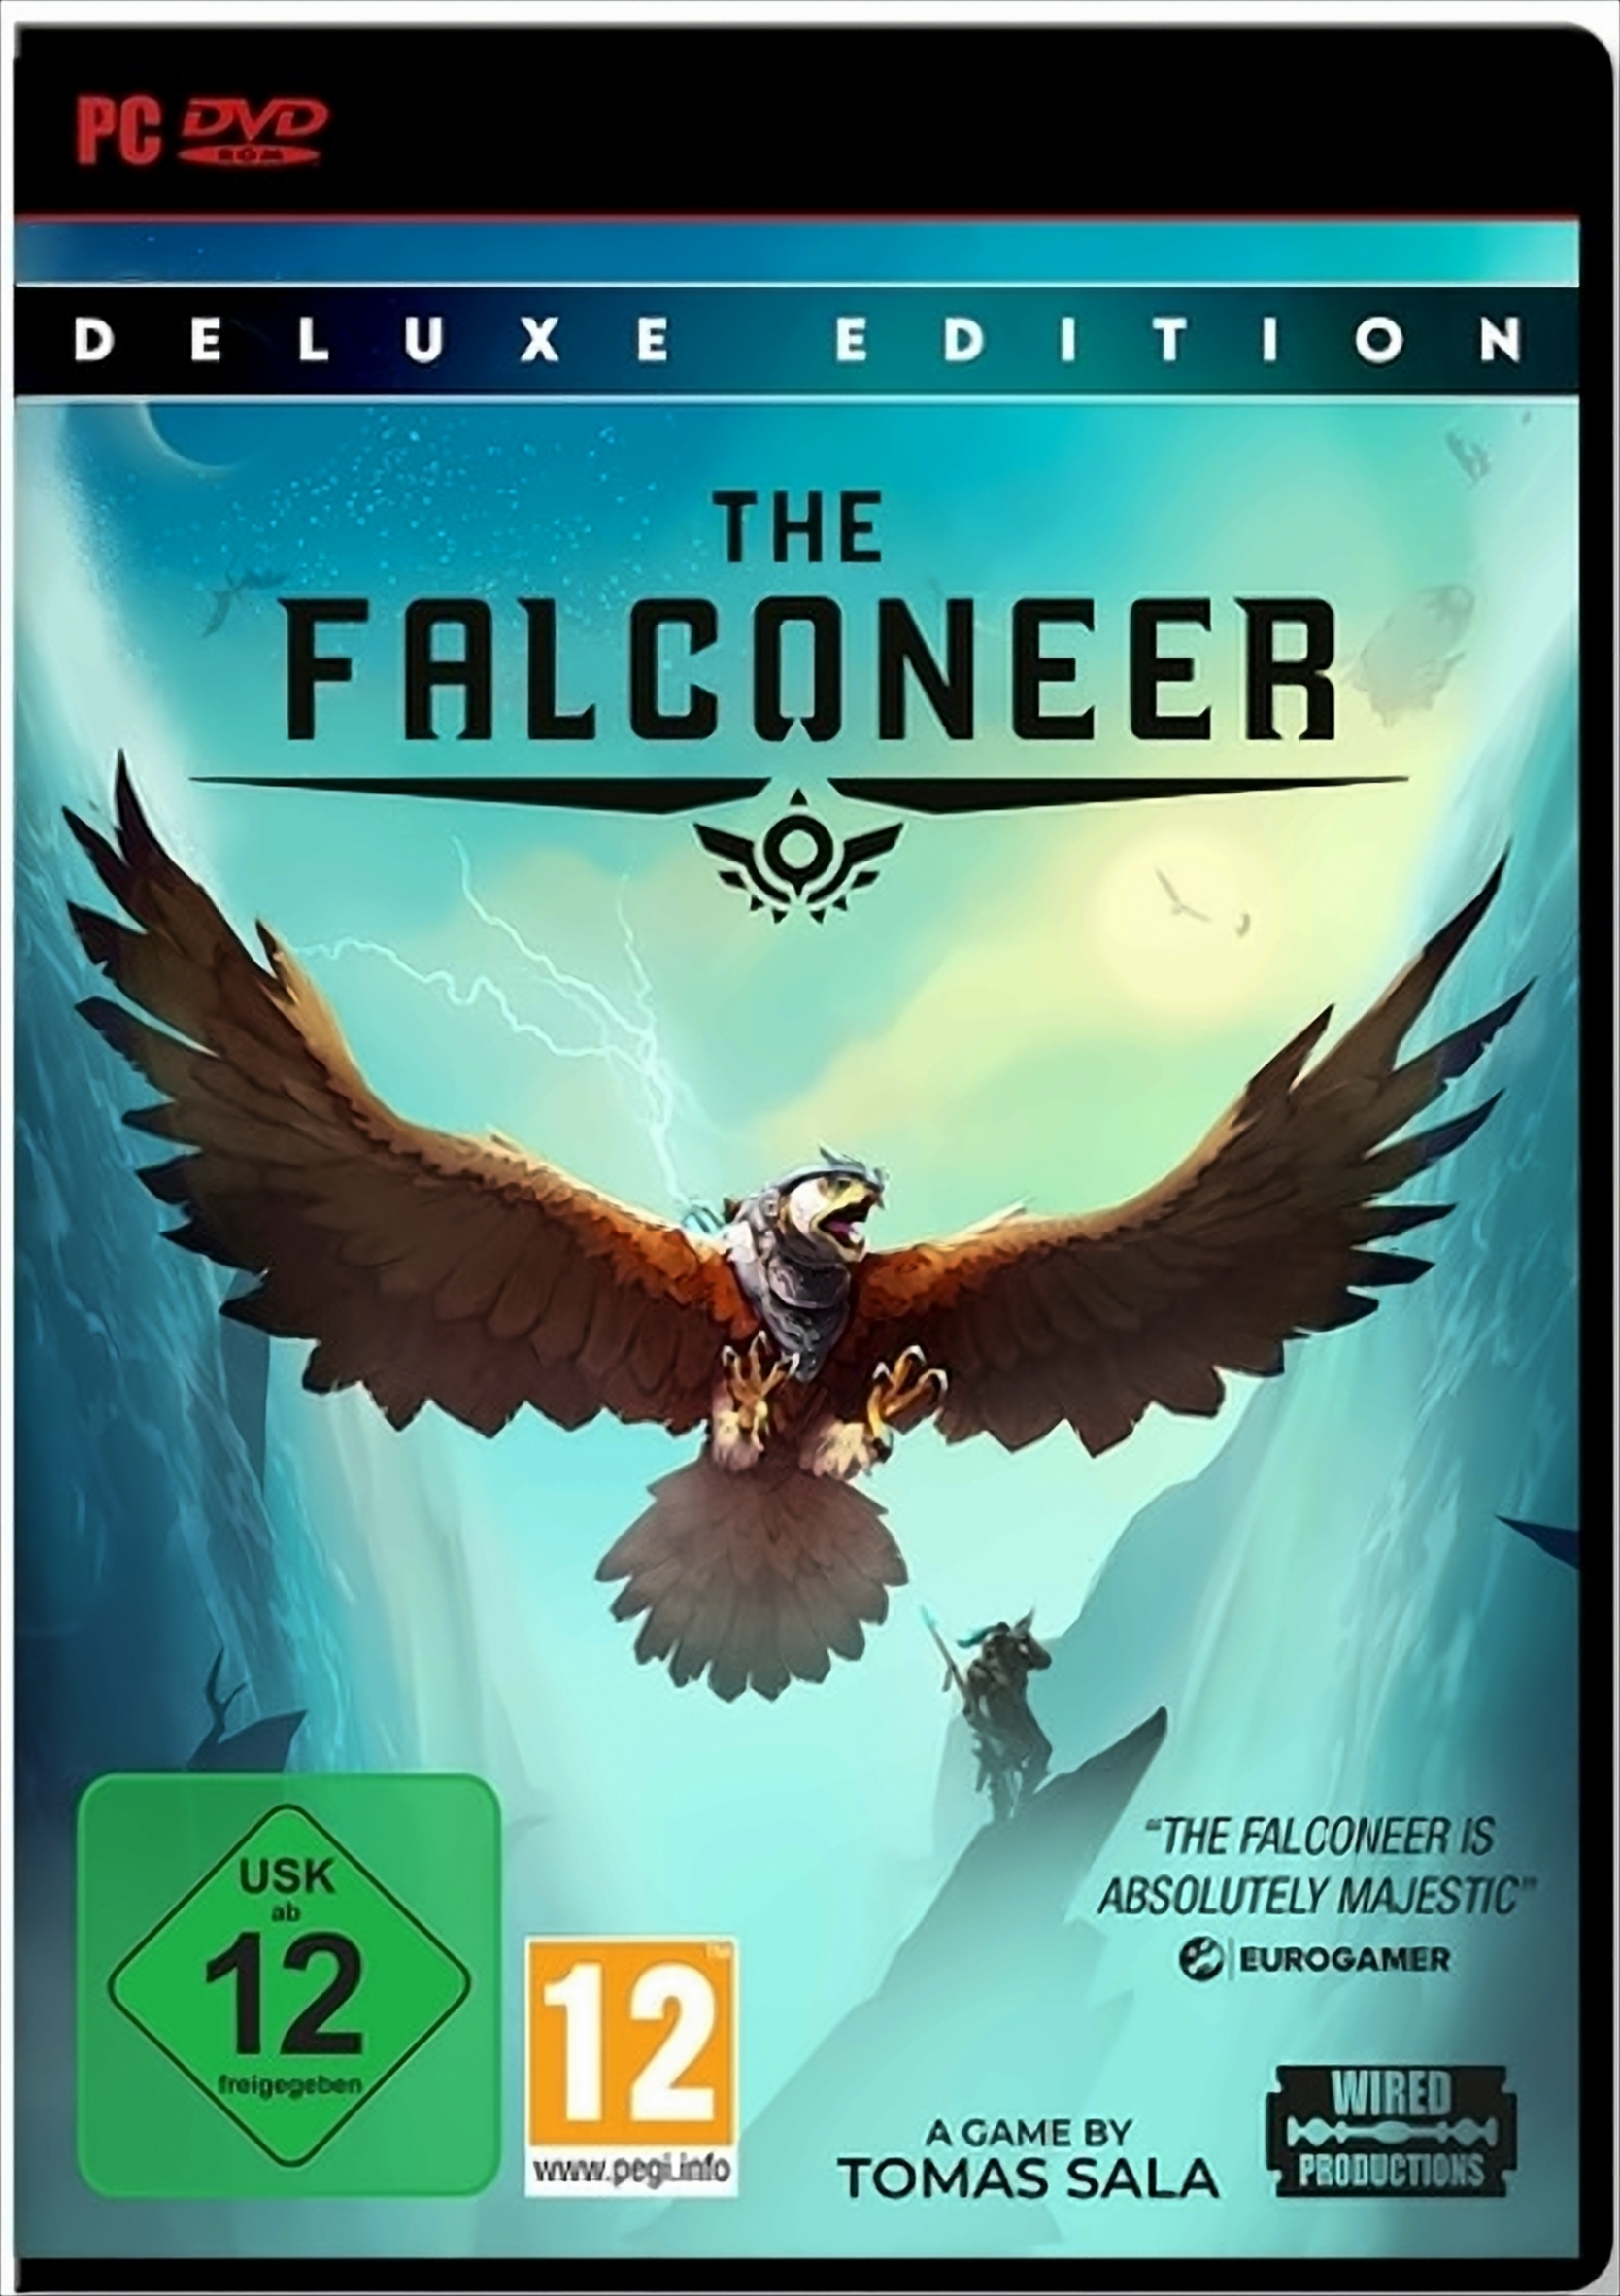 Edition - The Falconeer [PC] Deluxe